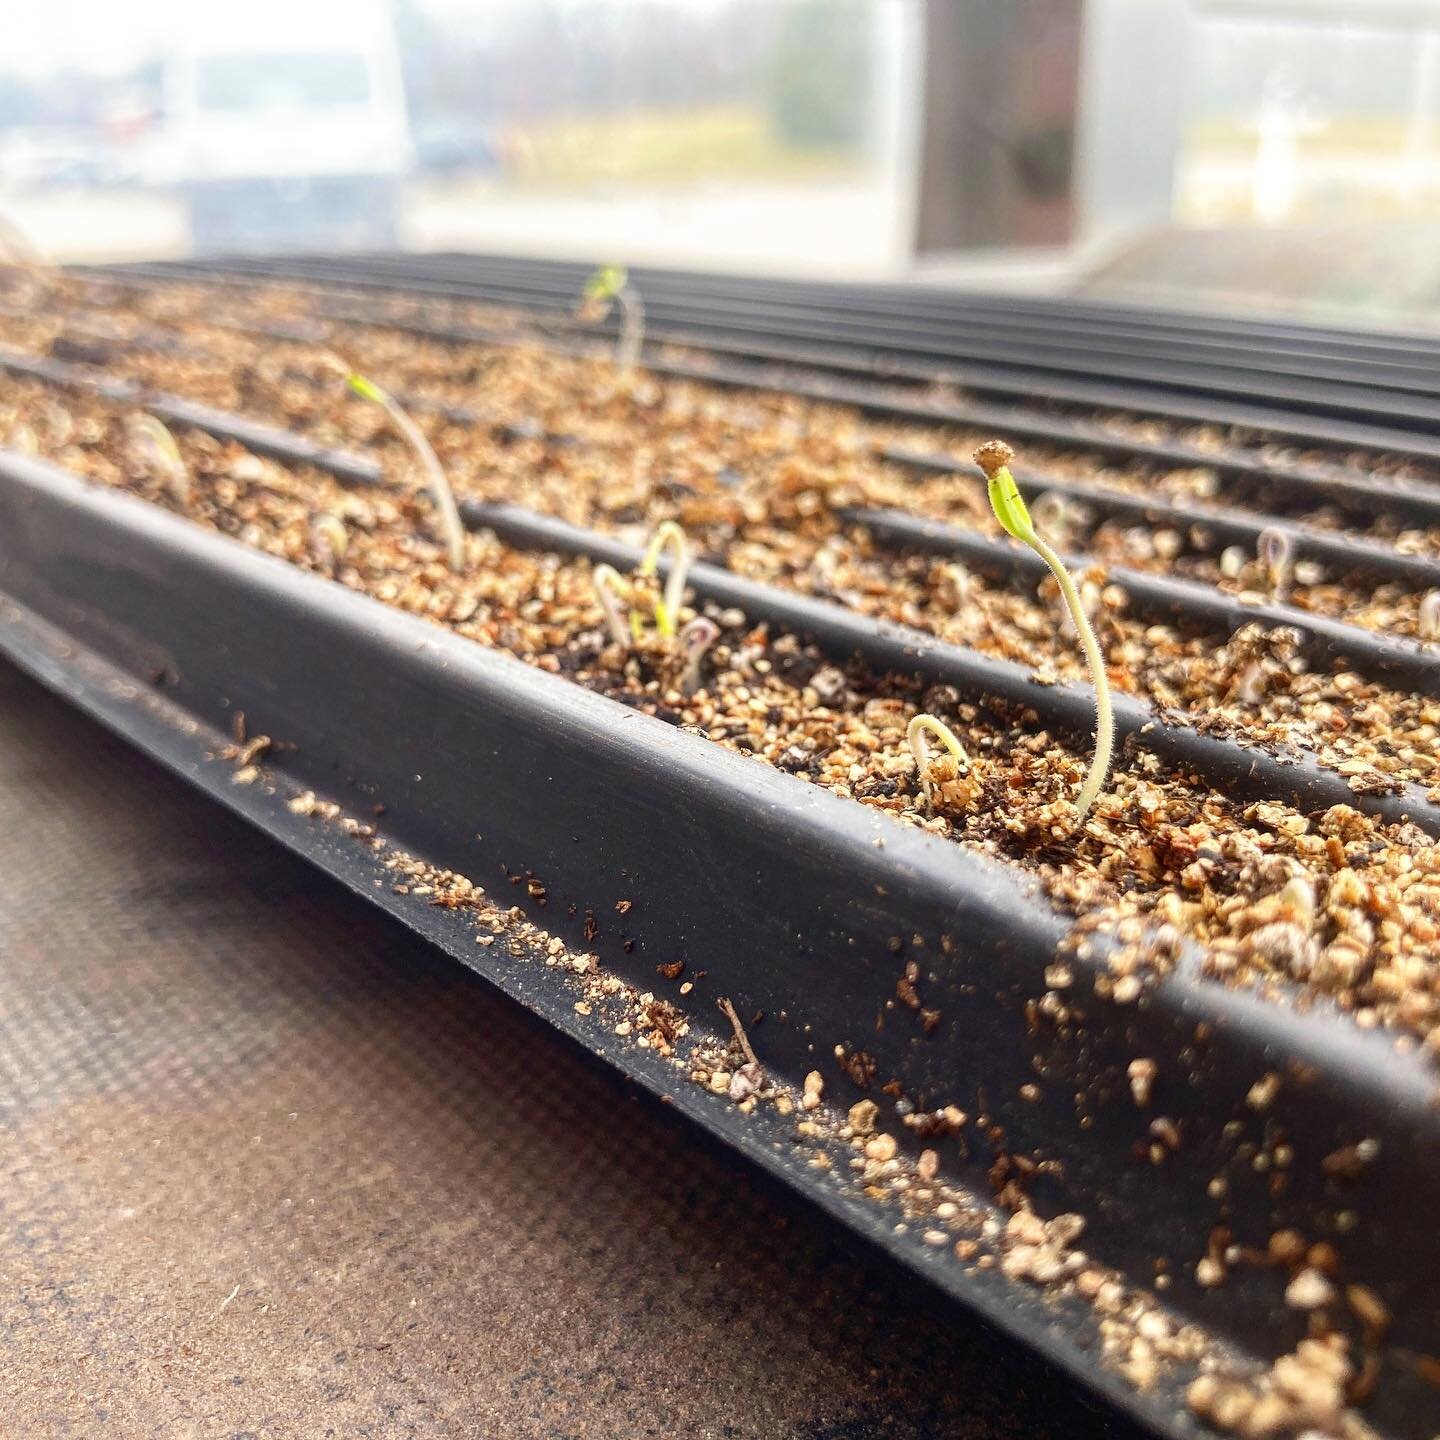 And so it begins. We have tomato and onion plants germinating in the greenhouse, with more plants being seeded every week. There is so much possibility in these little seedlings!